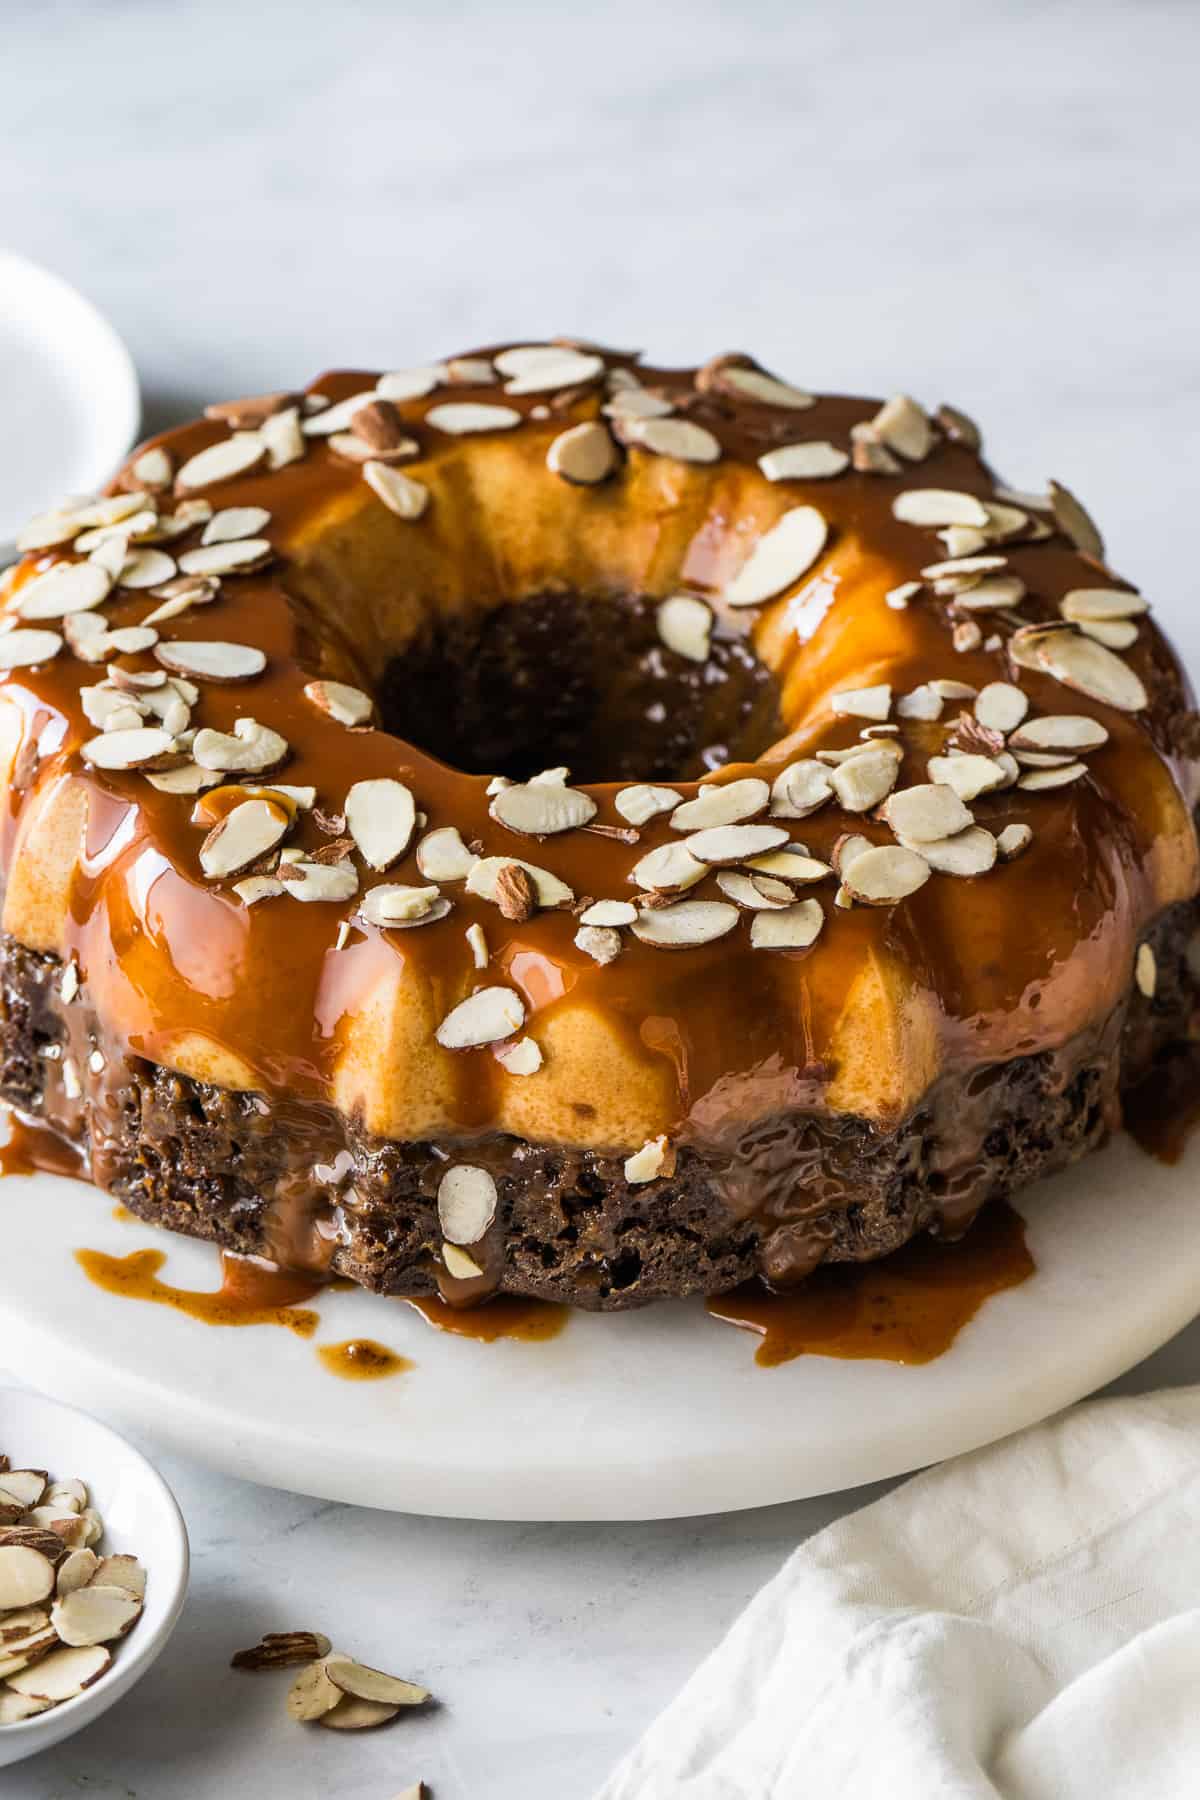 https://www.isabeleats.com/wp-content/uploads/2023/12/chocoflan-small-12.jpg